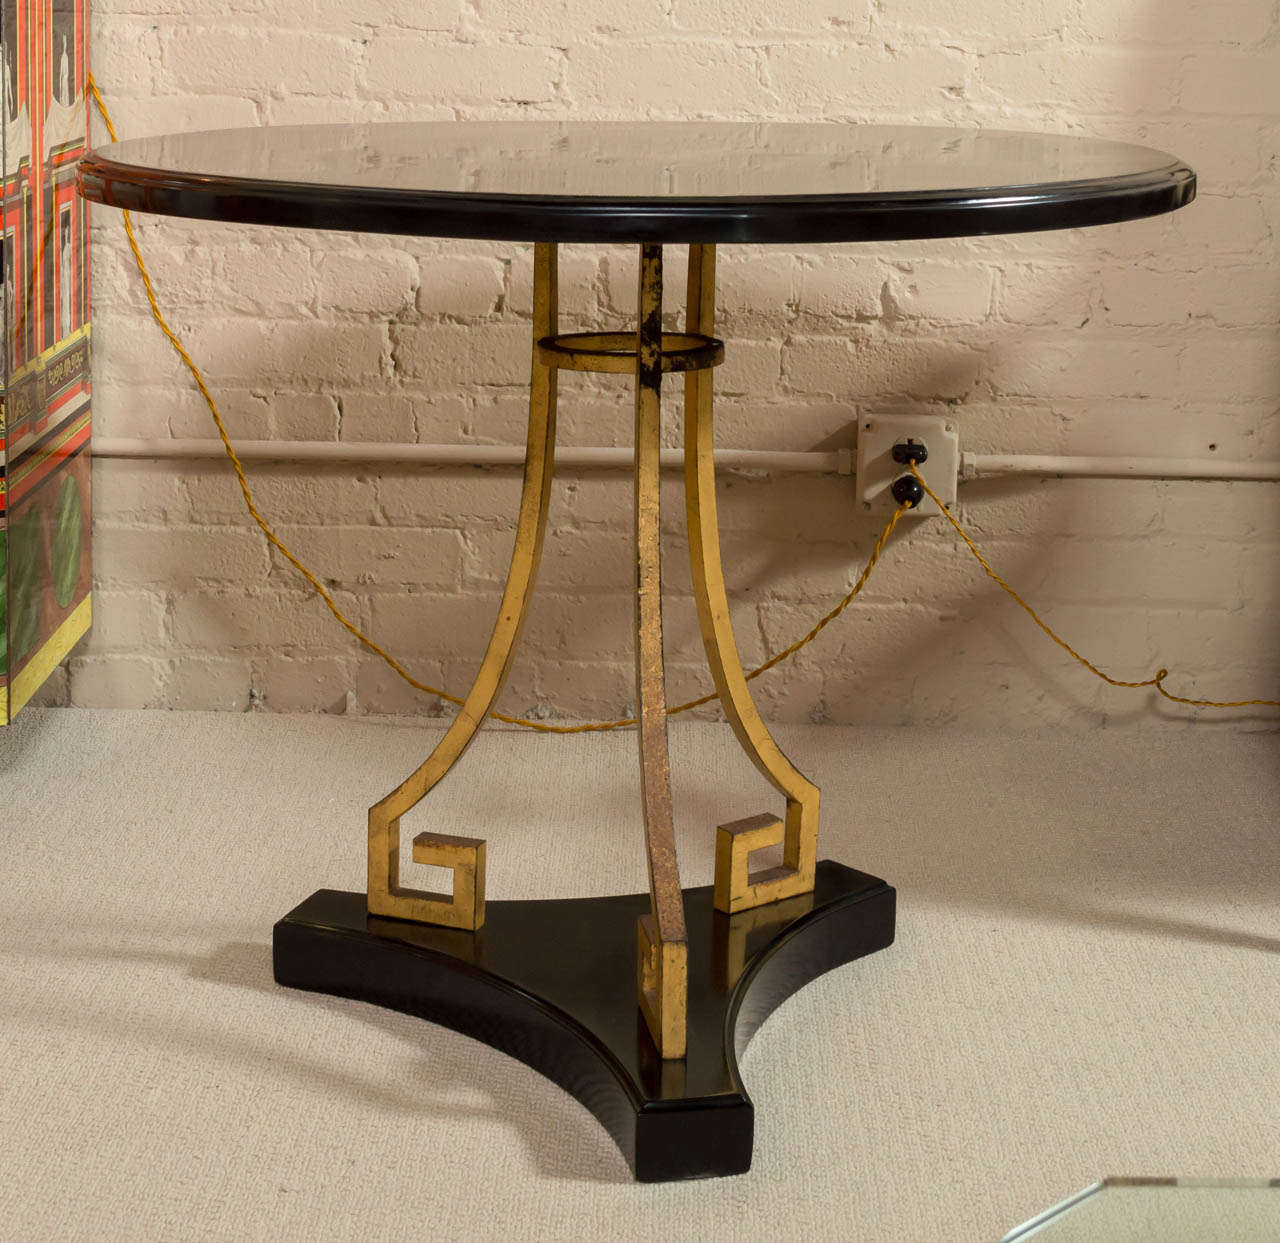 A Neoclassical table with an interesting, gilded, wrought-iron base and black-lacquered wooden top.
Marked - France - under top